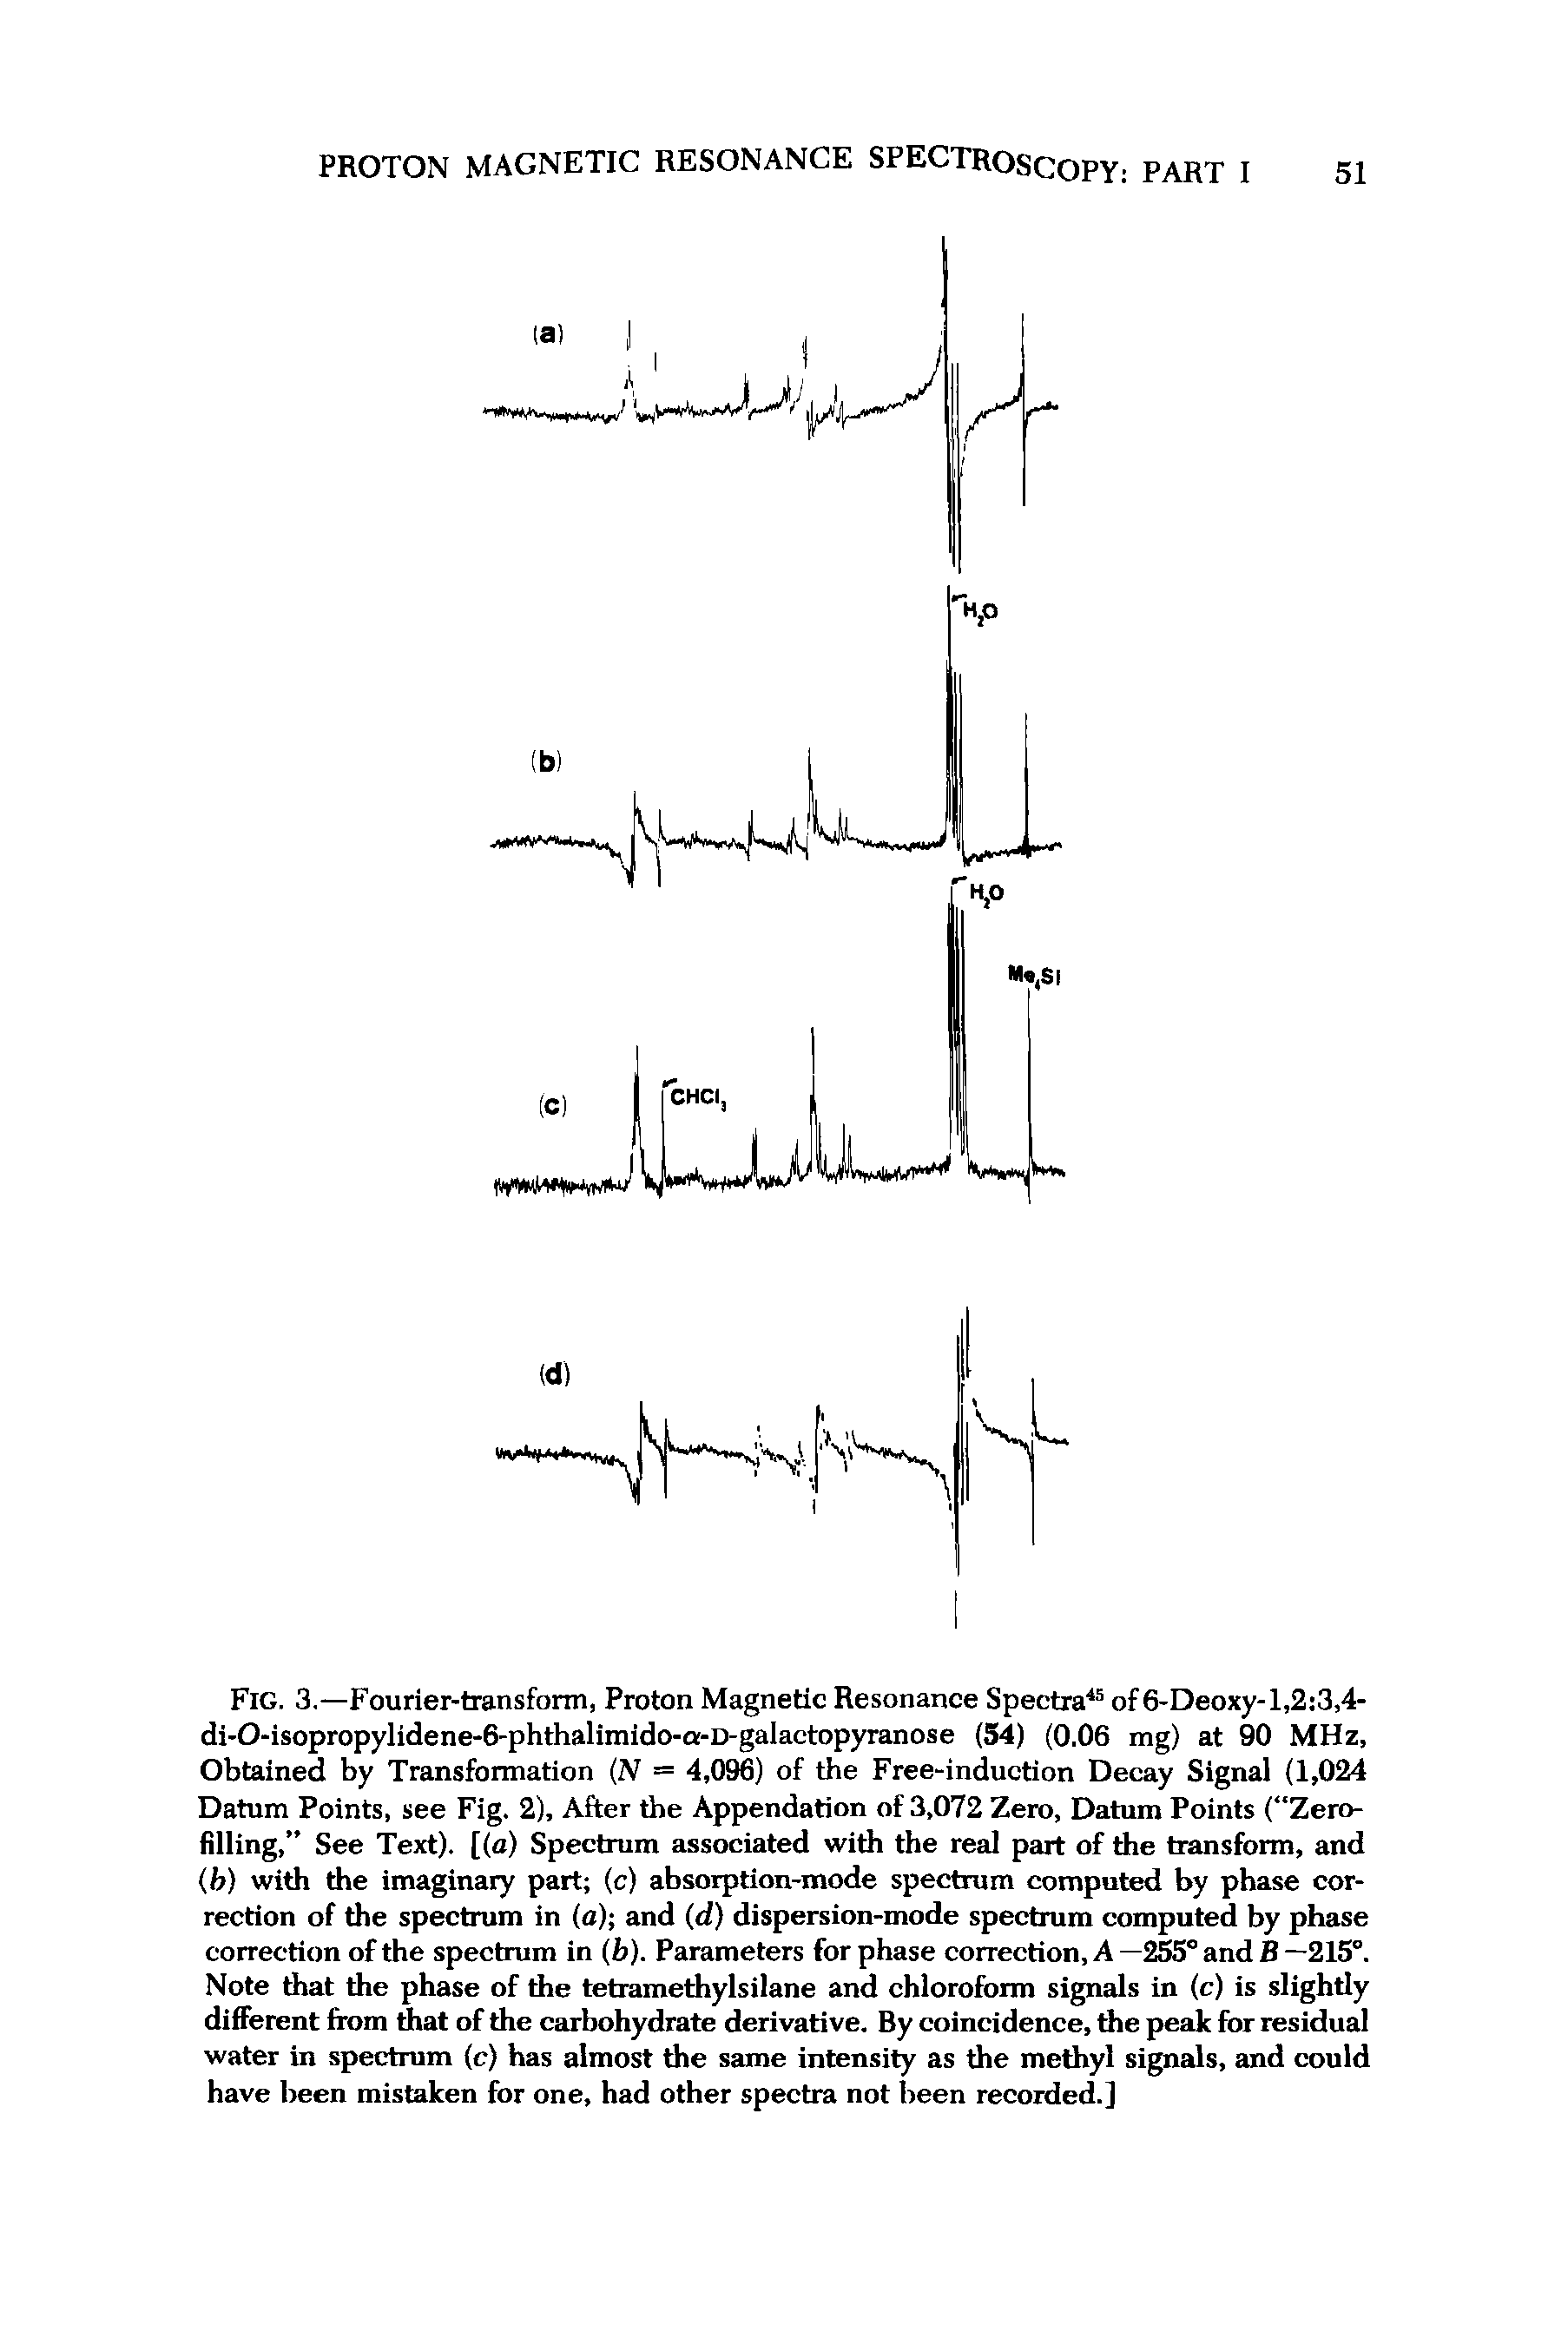 Fig. 3.—Fourier-transform, Proton Magnetic Resonance Spectra45 of 6-Deoxy-l,2 3,4-di-O-isopropylidene-6-phthalimido-a-D-gaIactopyranose (54) (0.06 mg) at 90 MHz, Obtained by Transformation (N = 4,096) of the Free-induction Decay Signal (1,024 Datum Points, see Fig. 2), After the Appendation of 3,072 Zero, Datum Points ( Zerofilling, See Text), [(a) Spectrum associated with the real part of the transform, and (b) with the imaginary part (c) absorption-mode spectrum computed by phase correction of the spectrum in (a) and (d) dispersion-mode spectrum computed by phase correction of the spectrum in (b). Parameters for phase correction, A —255° and B —215°. Note that the phase of the tetramethylsilane and chloroform signals in (c) is slightly different from that of the carbohydrate derivative. By coincidence, the peak for residual water in spectrum (c) has almost the same intensity as the methyl signals, and could have been mistaken for one, had other spectra not been recorded.]...